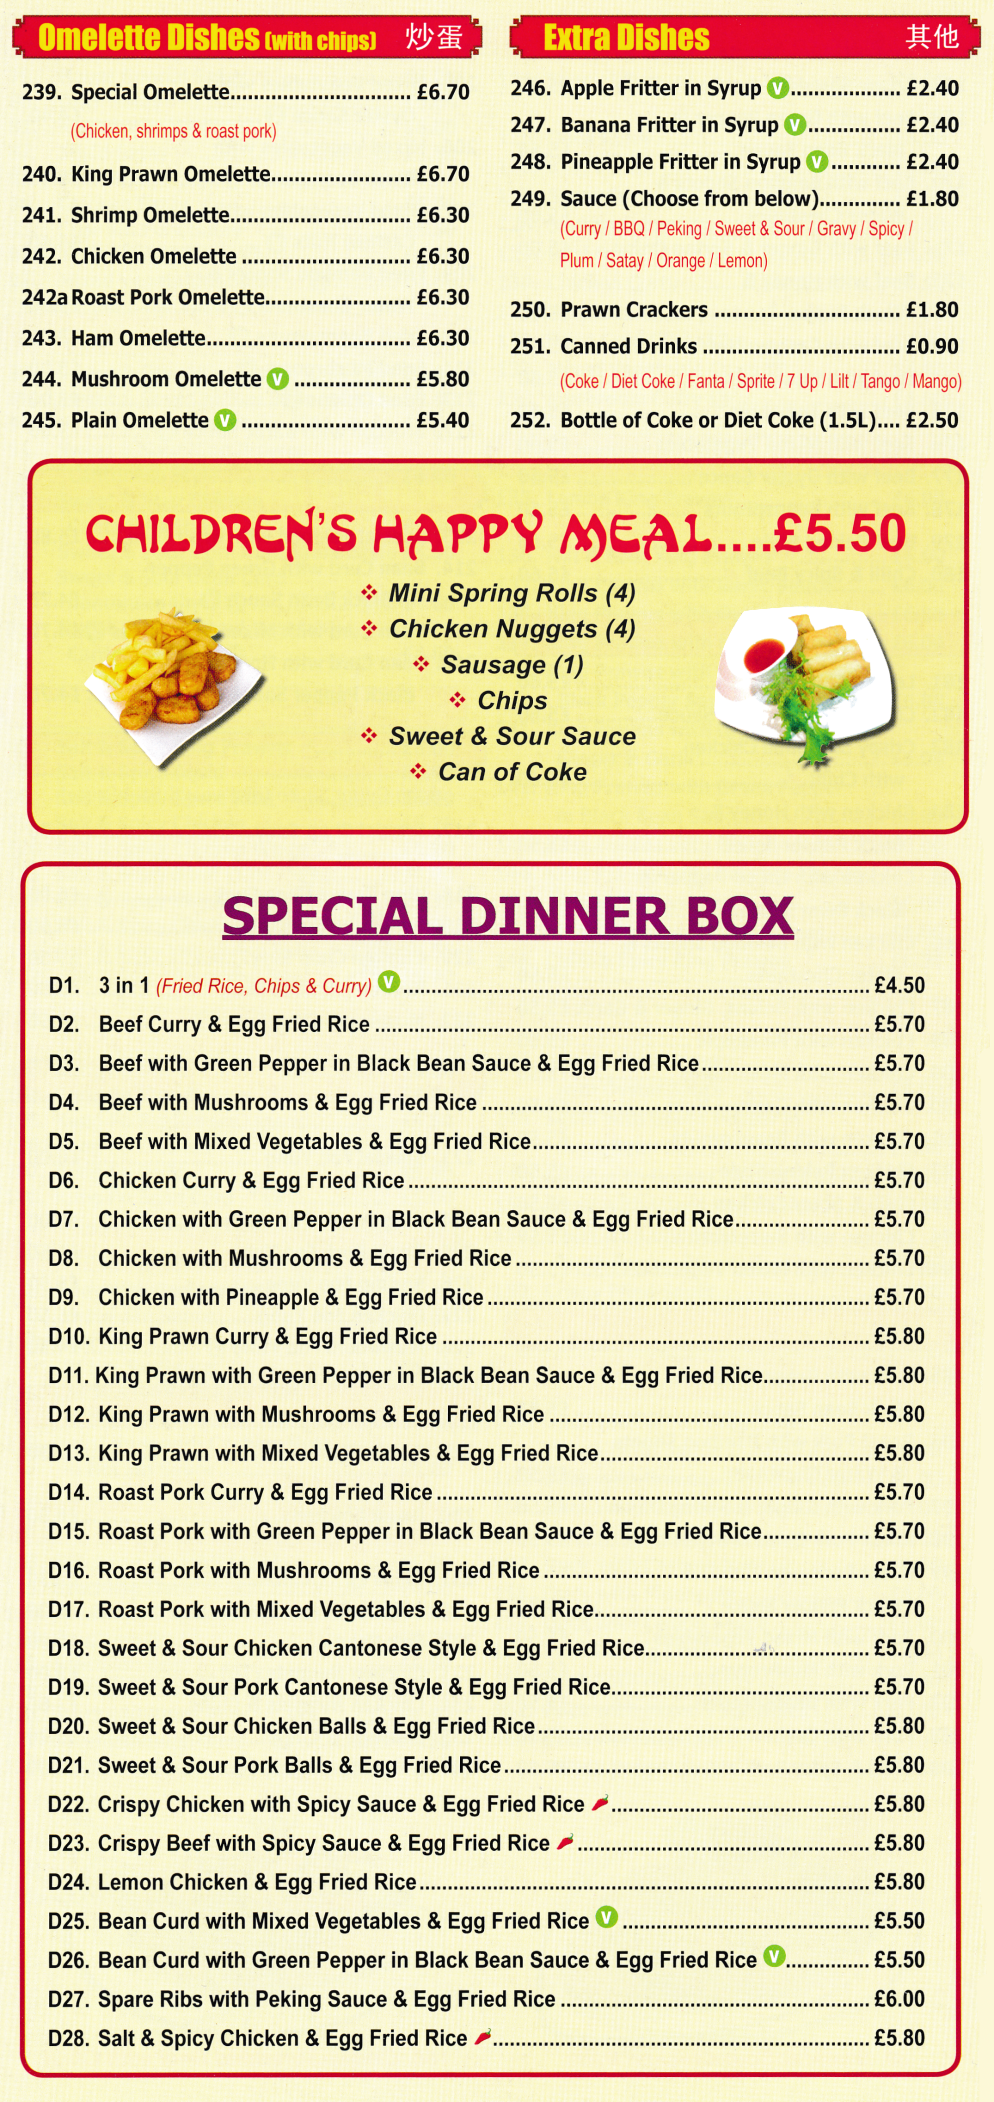 Menu for Tammy's - Special Dinner Boxes, Omelette dishes, Happy Meal, Special Set Dinners..